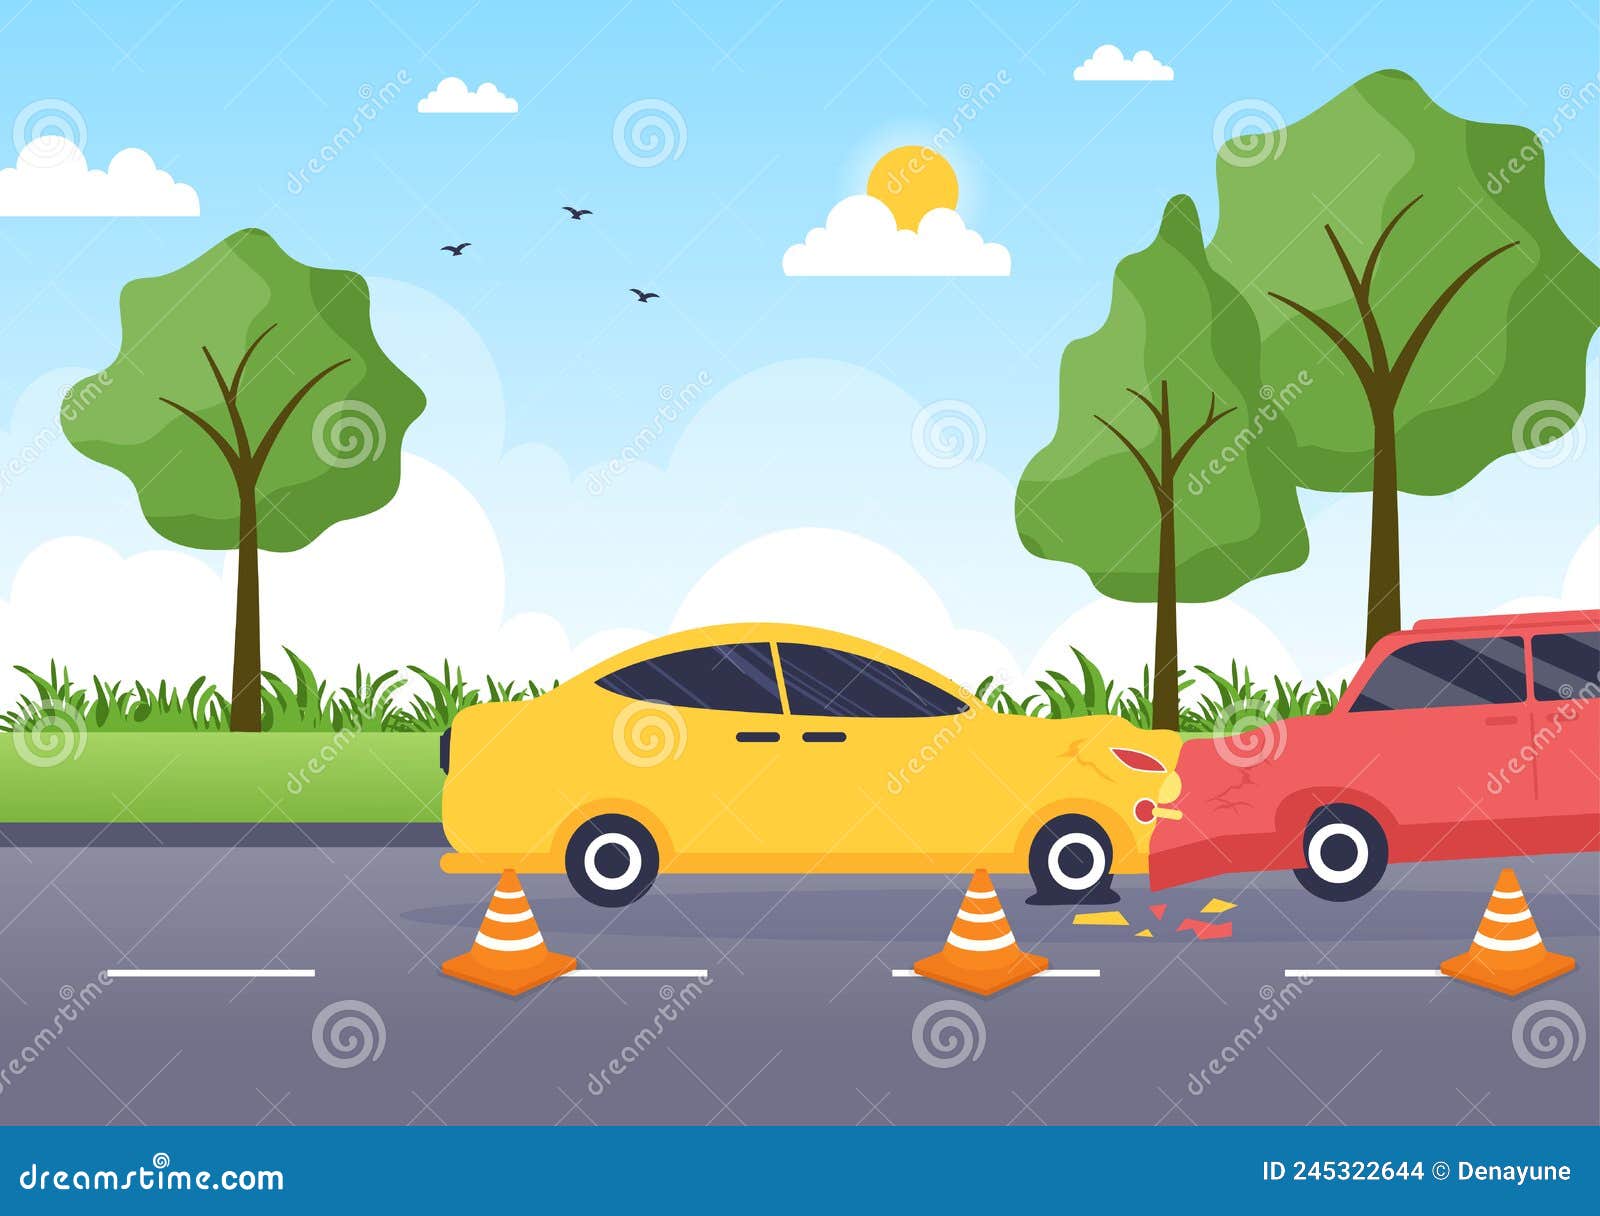 Car Accident Background Illustration with Two Cars Colliding or Hitting ...